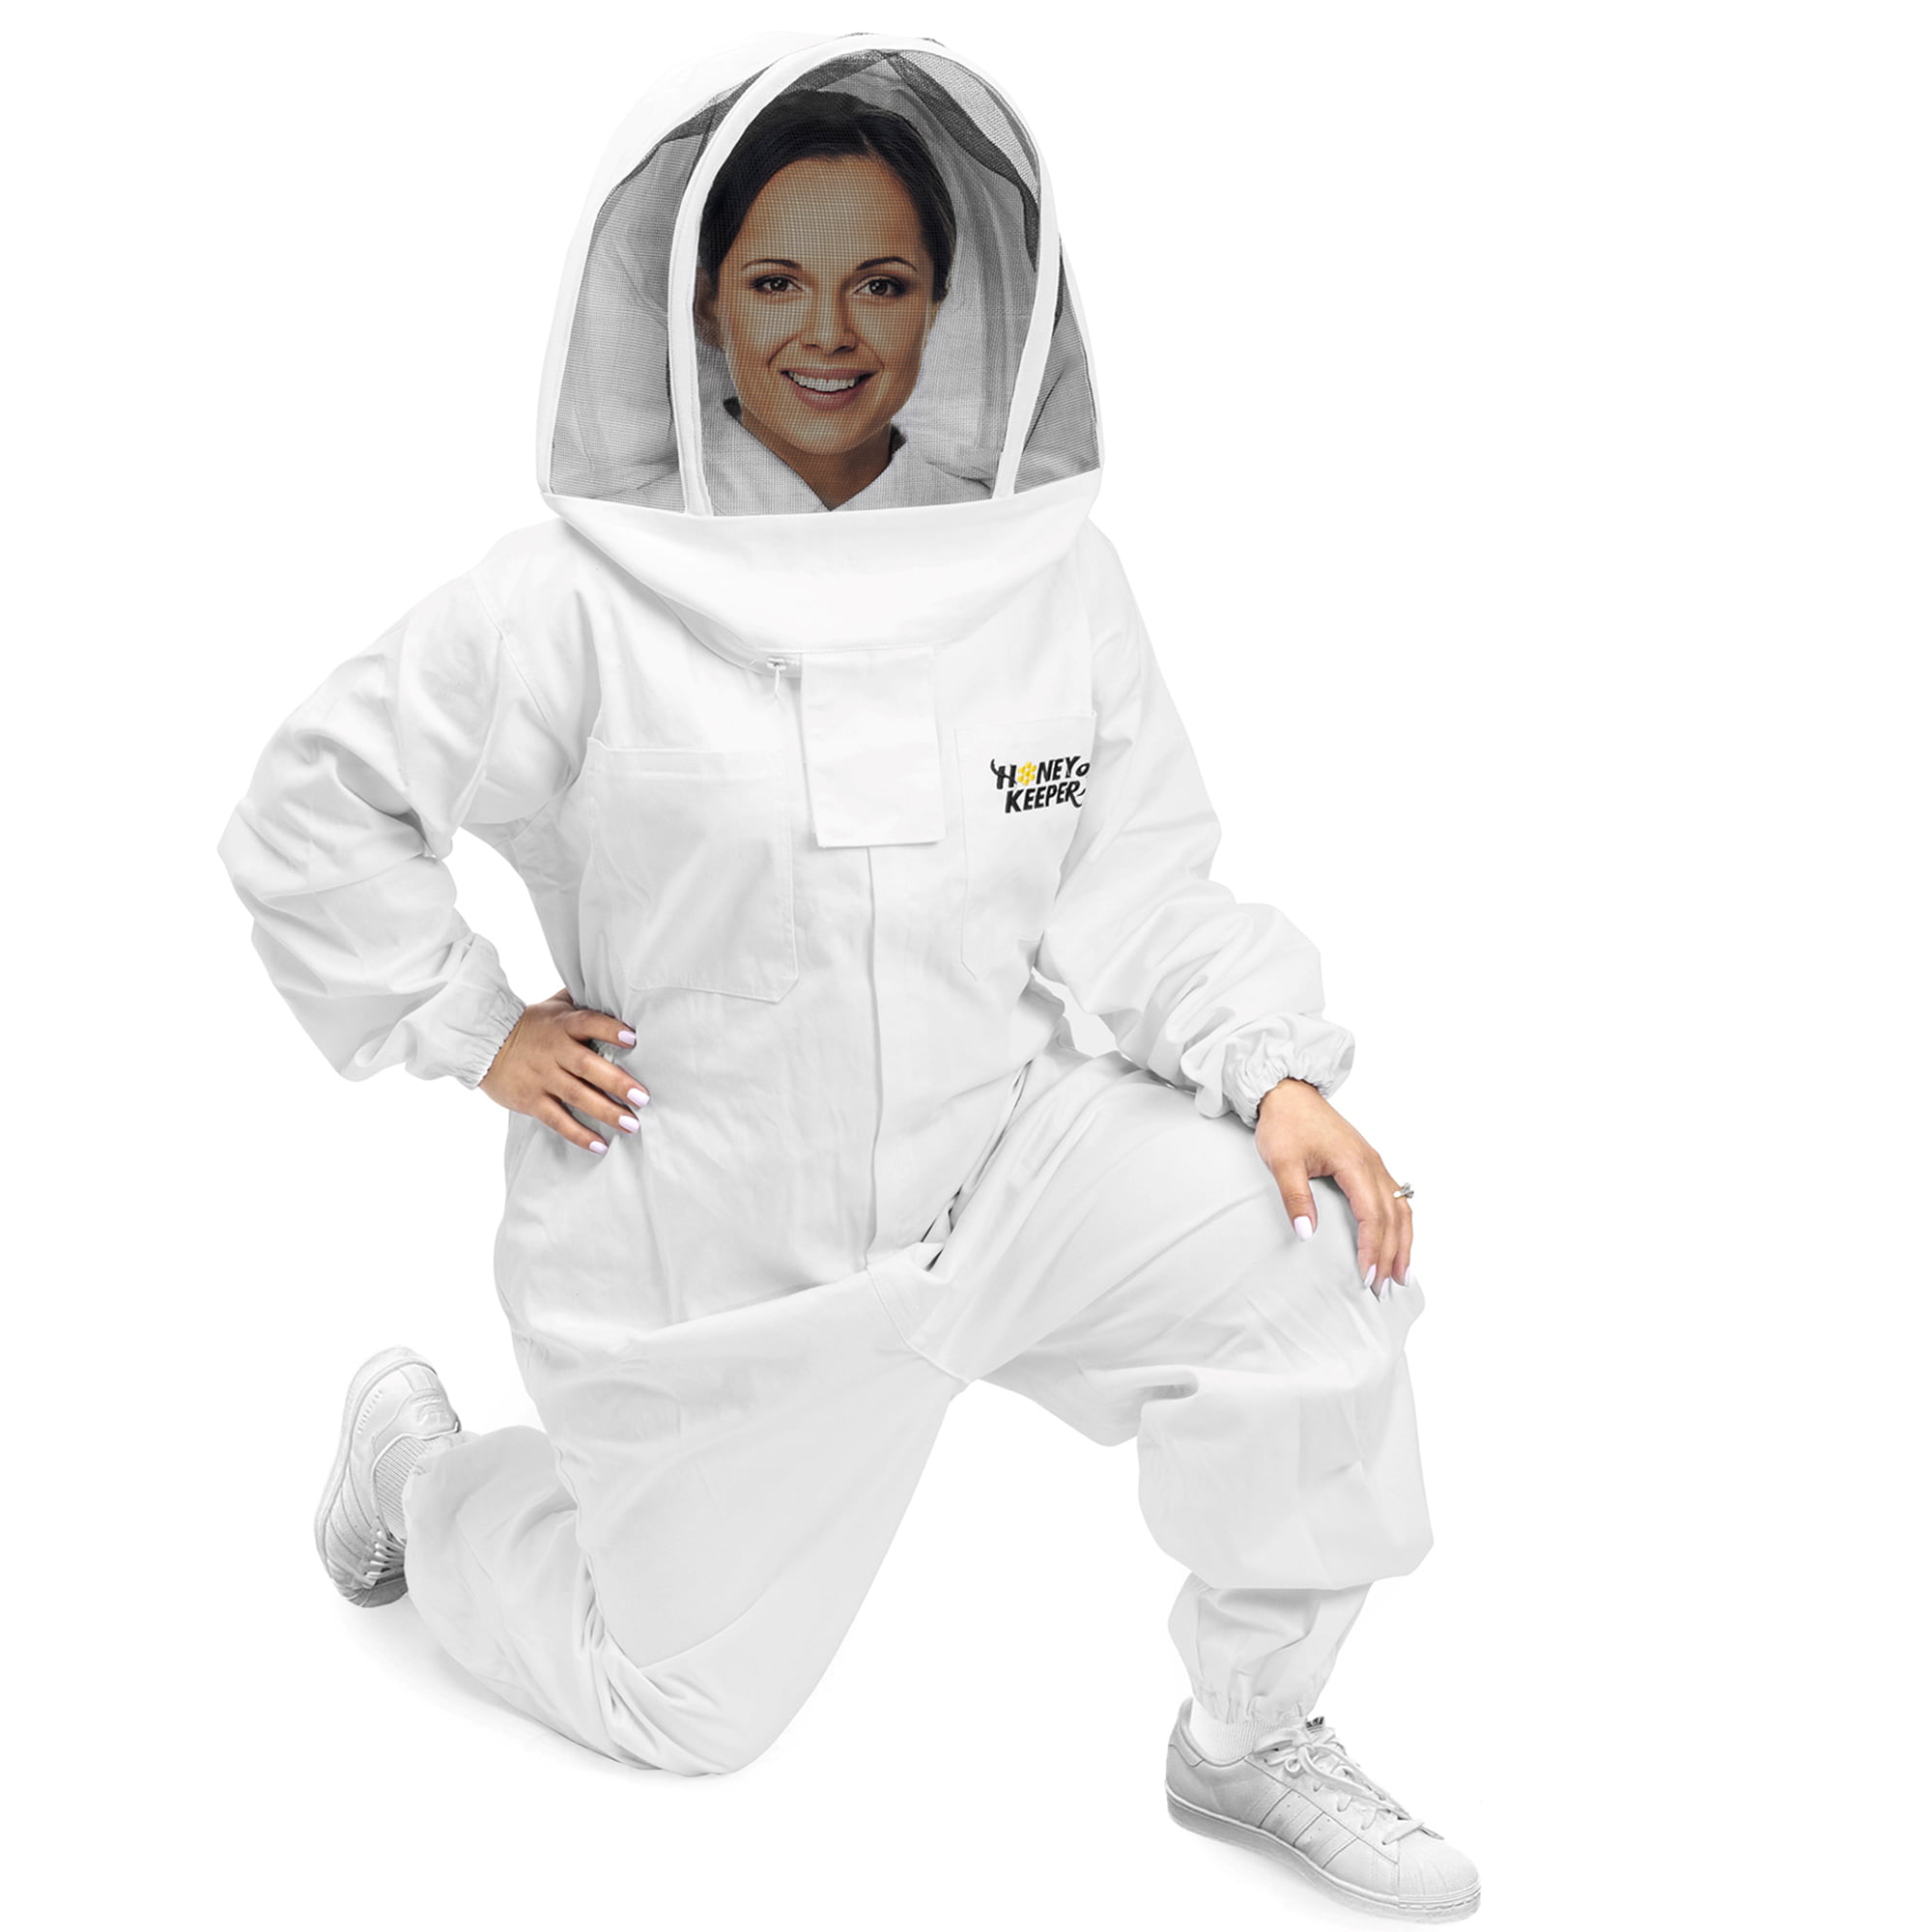 Professional Cotton Full Body Beekeeping Bee Keeping Suit With Veil Hood White # 